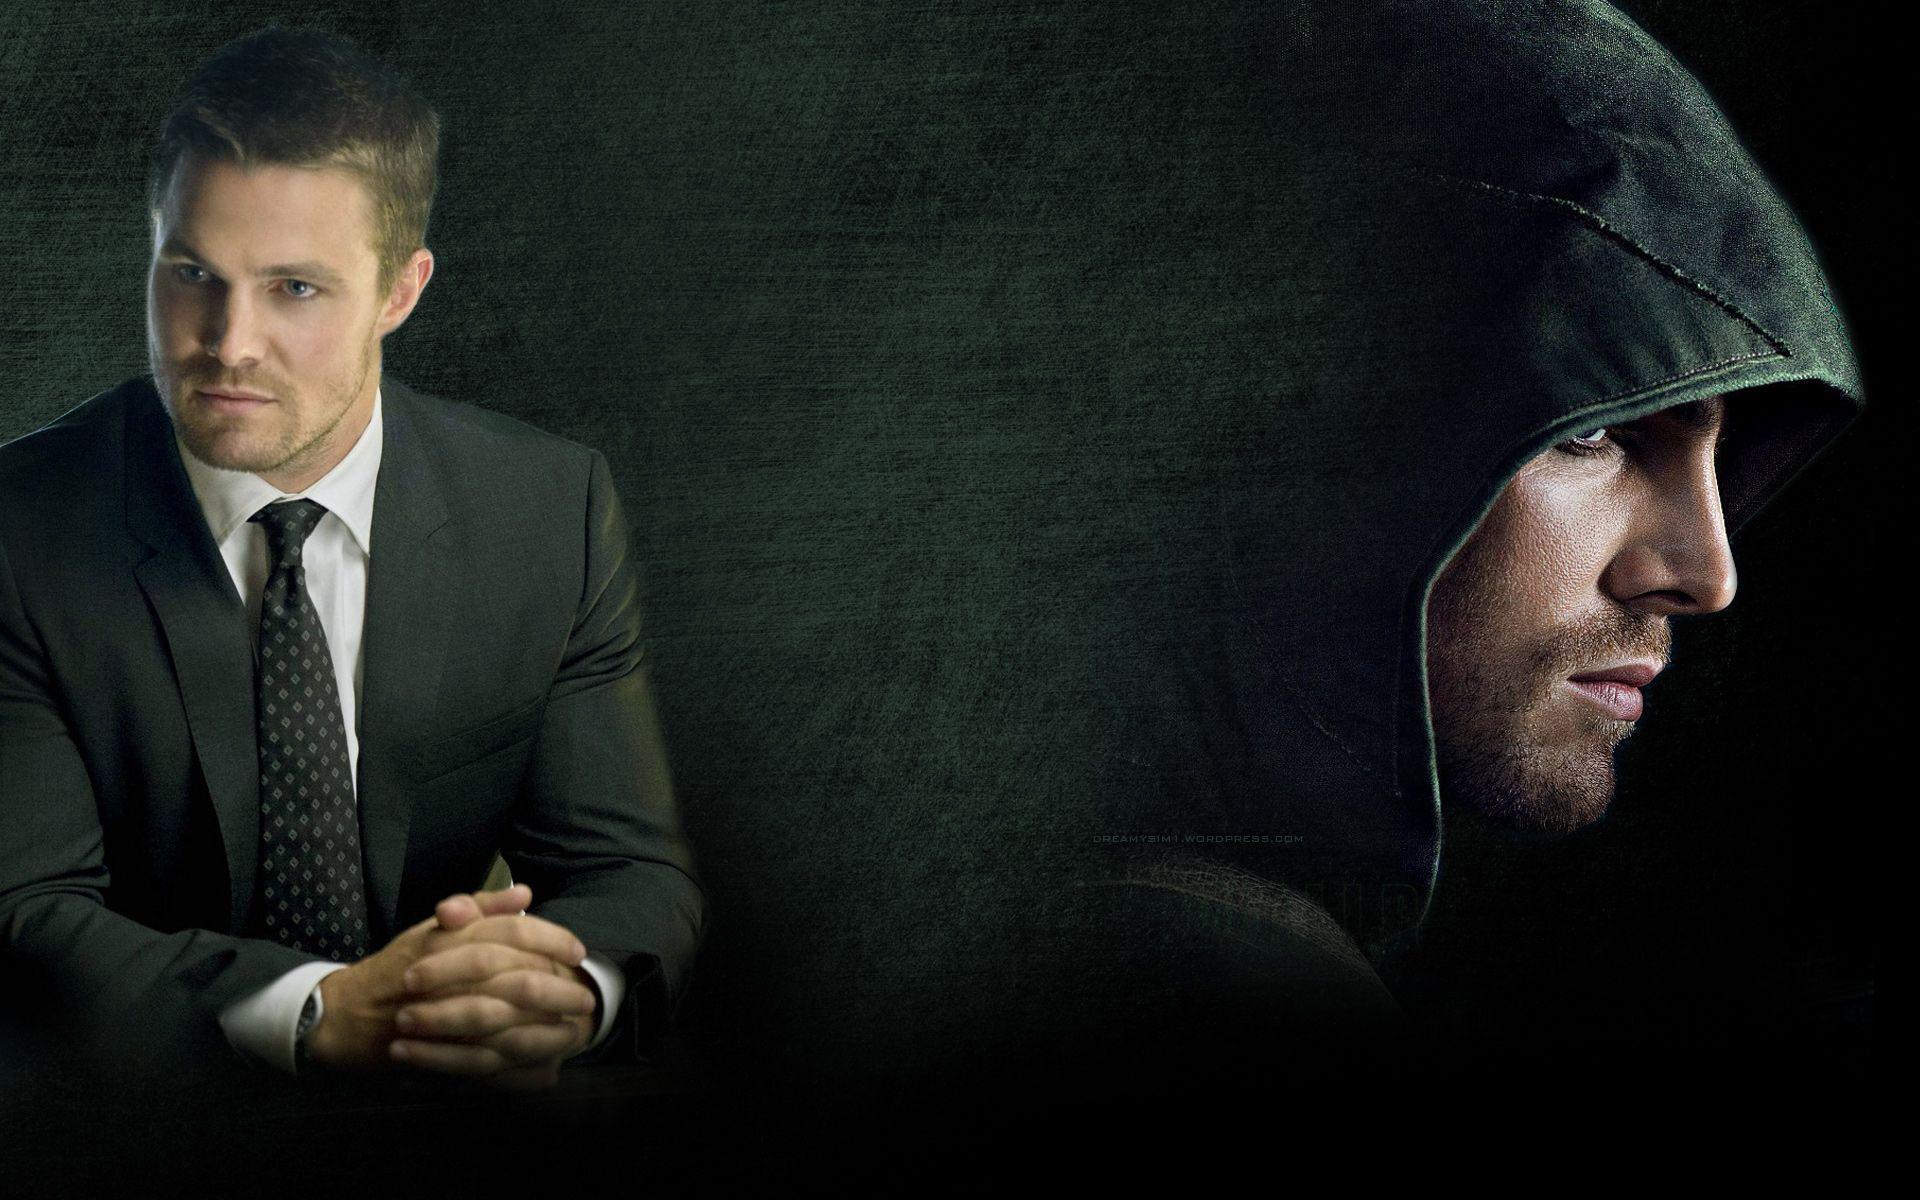 Great New Oliver Queen Wallpaper Made